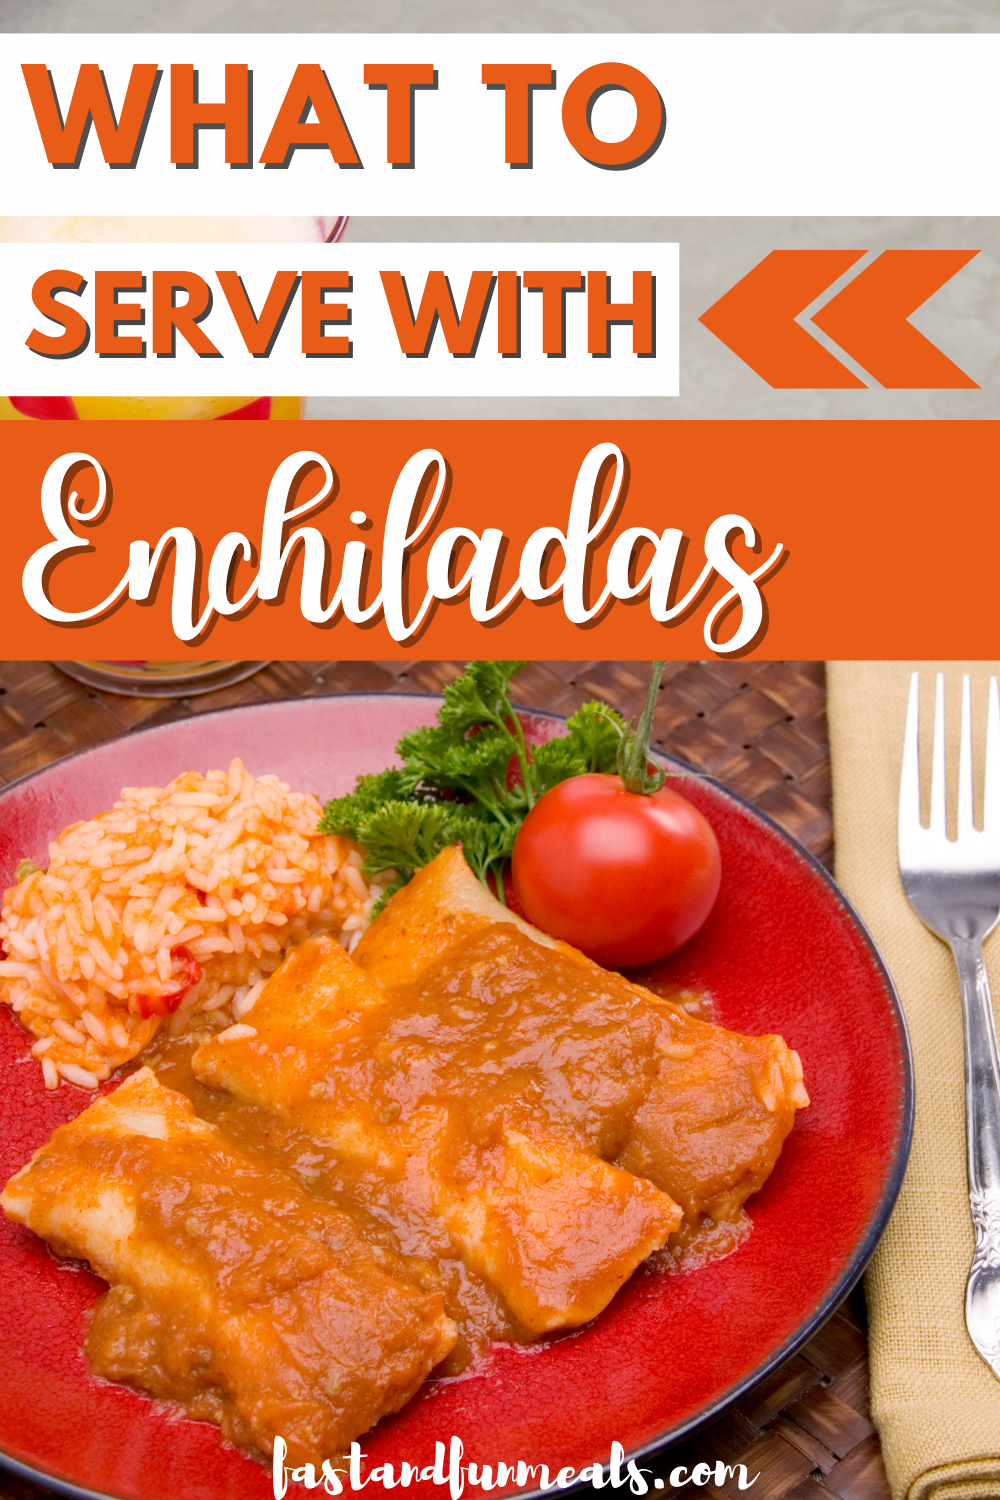 Pin showing the title What to Serve with Enchiladas